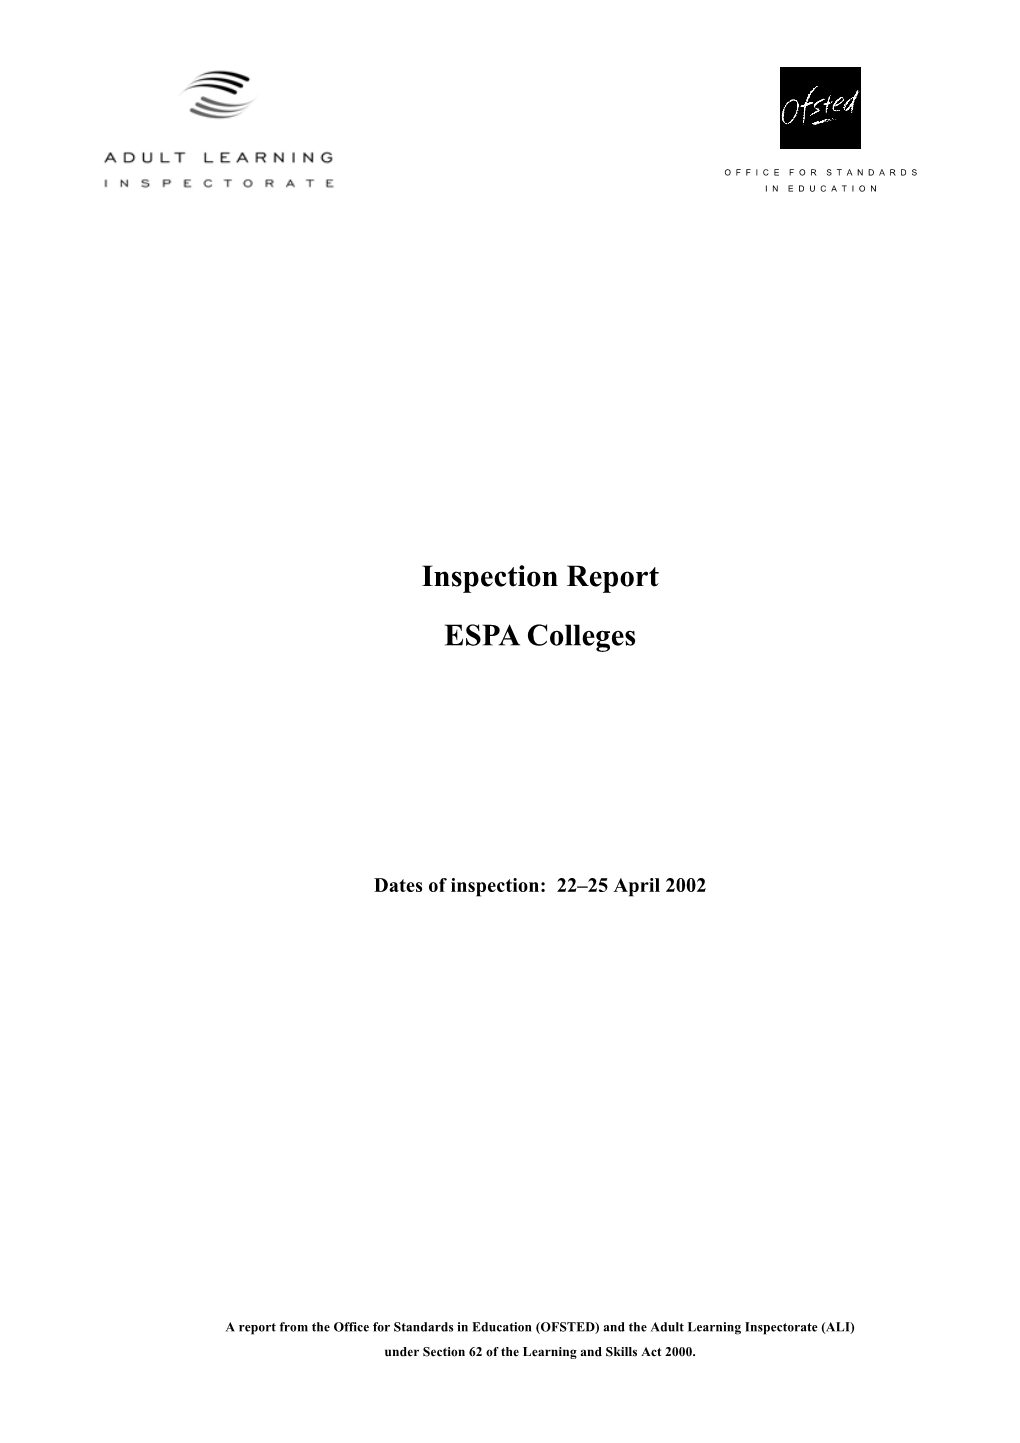 Inspection Report ESPA Colleges